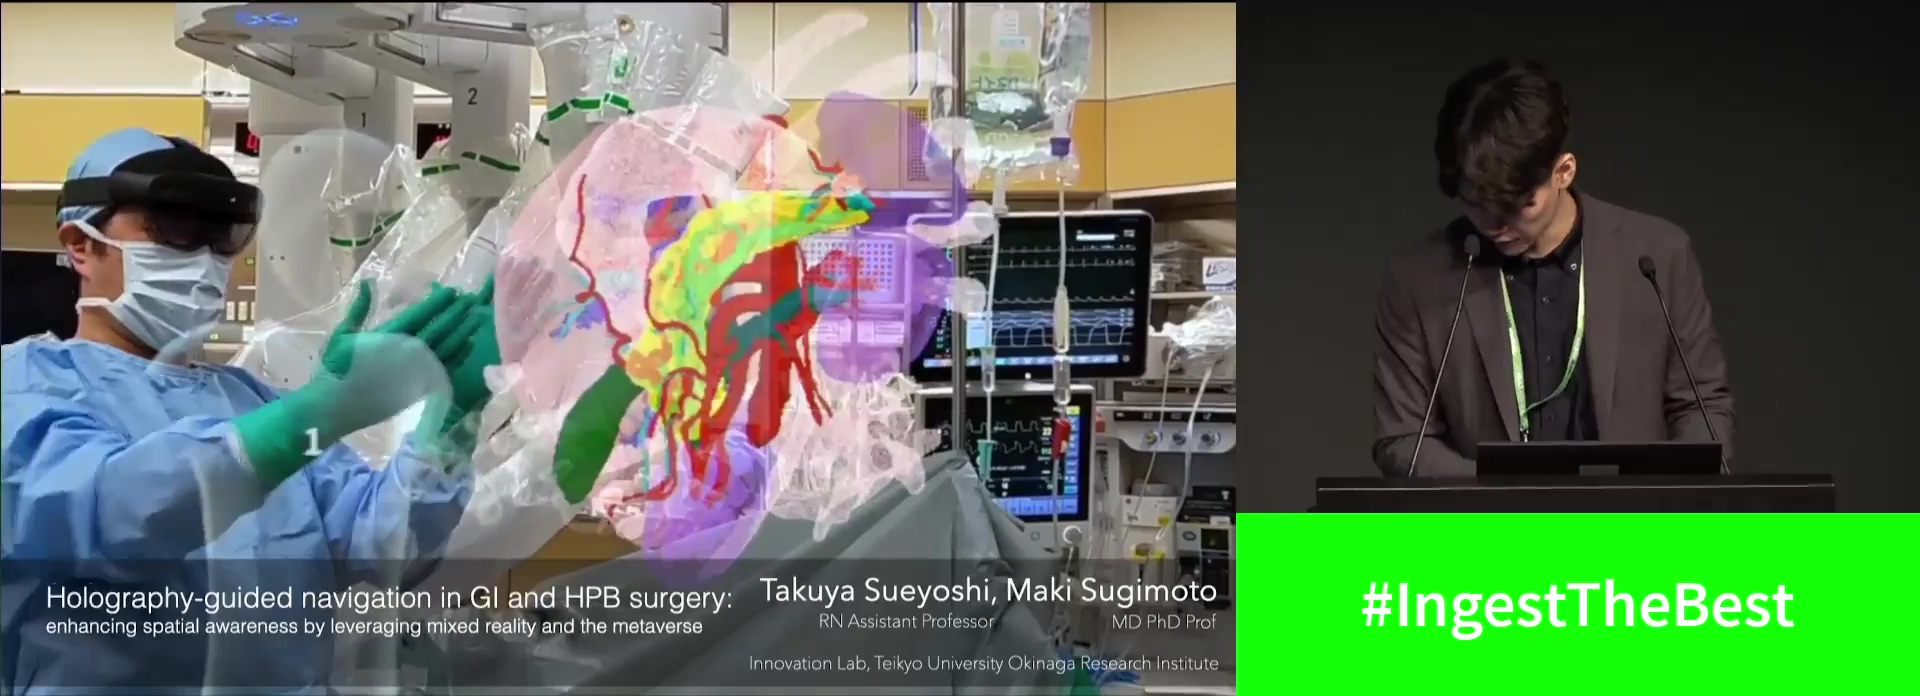 <em>HOLOGRAPHY-GUIDED</em> NAVIGATION IN GI AND HPB SURGERY: ENHANCING SPATIAL AWARENESS BY LEVERAGING MIXED REALITY AND THE METAVERSE